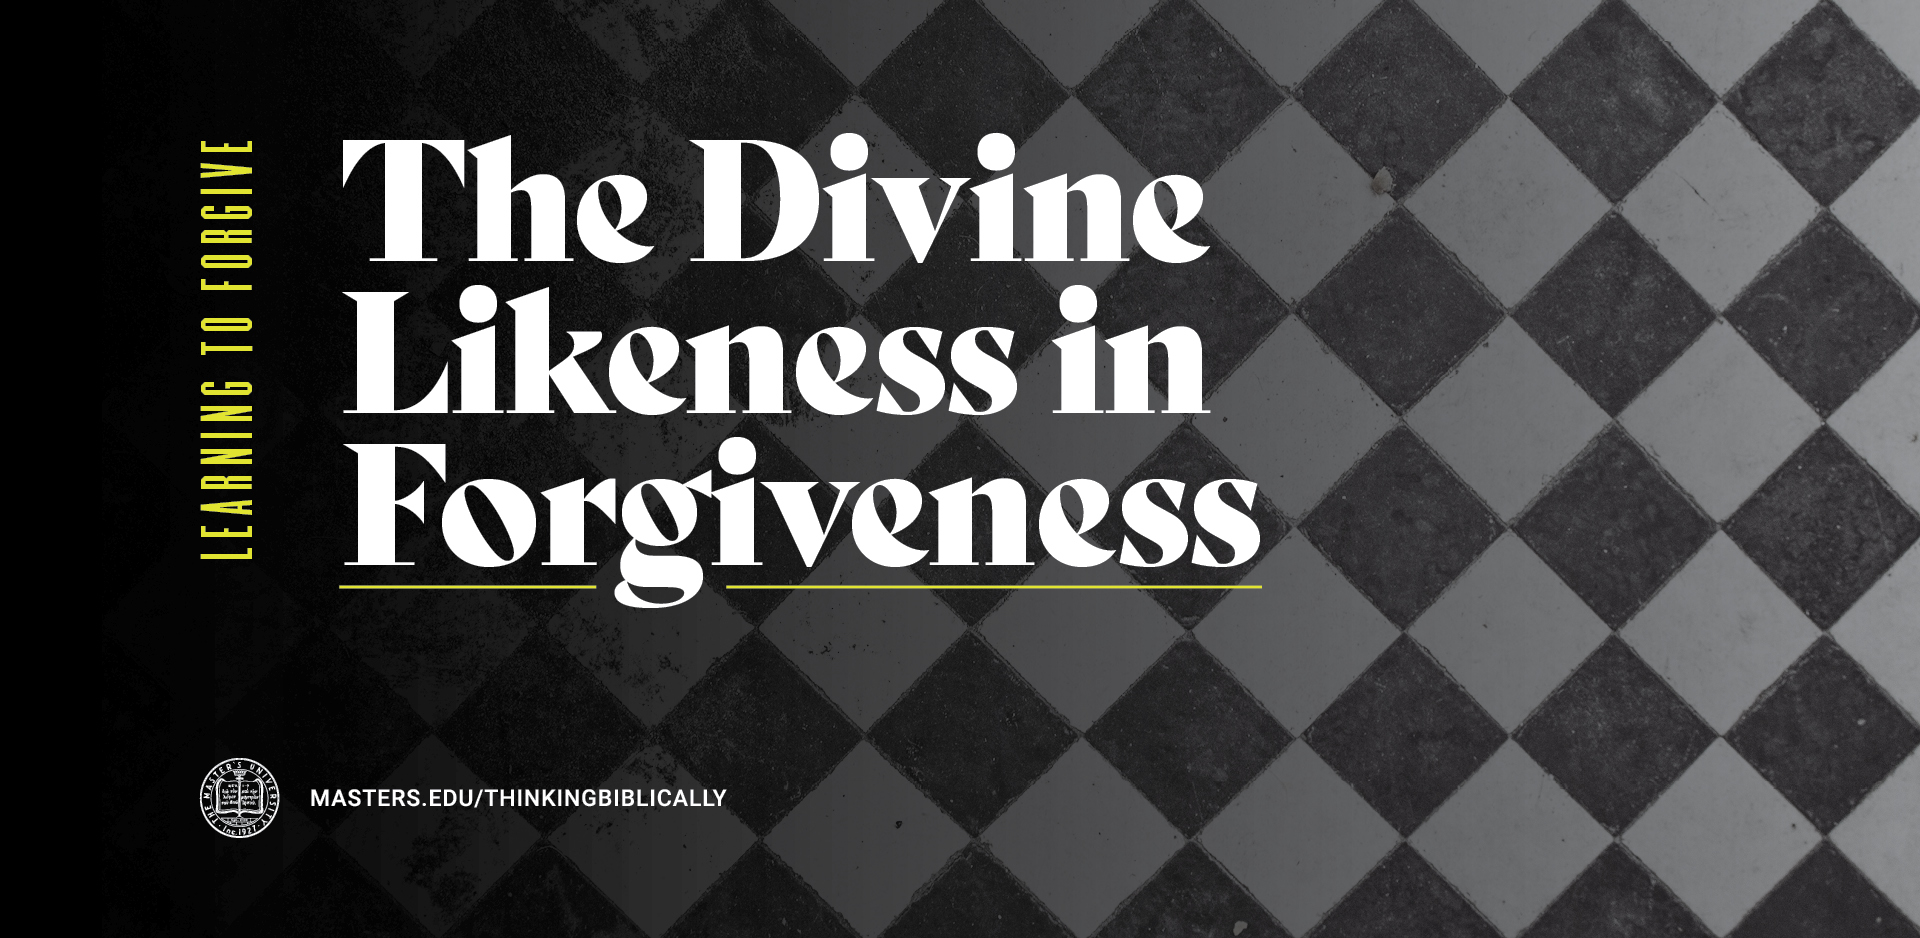 The Divine Likeness in Forgiveness Featured Image